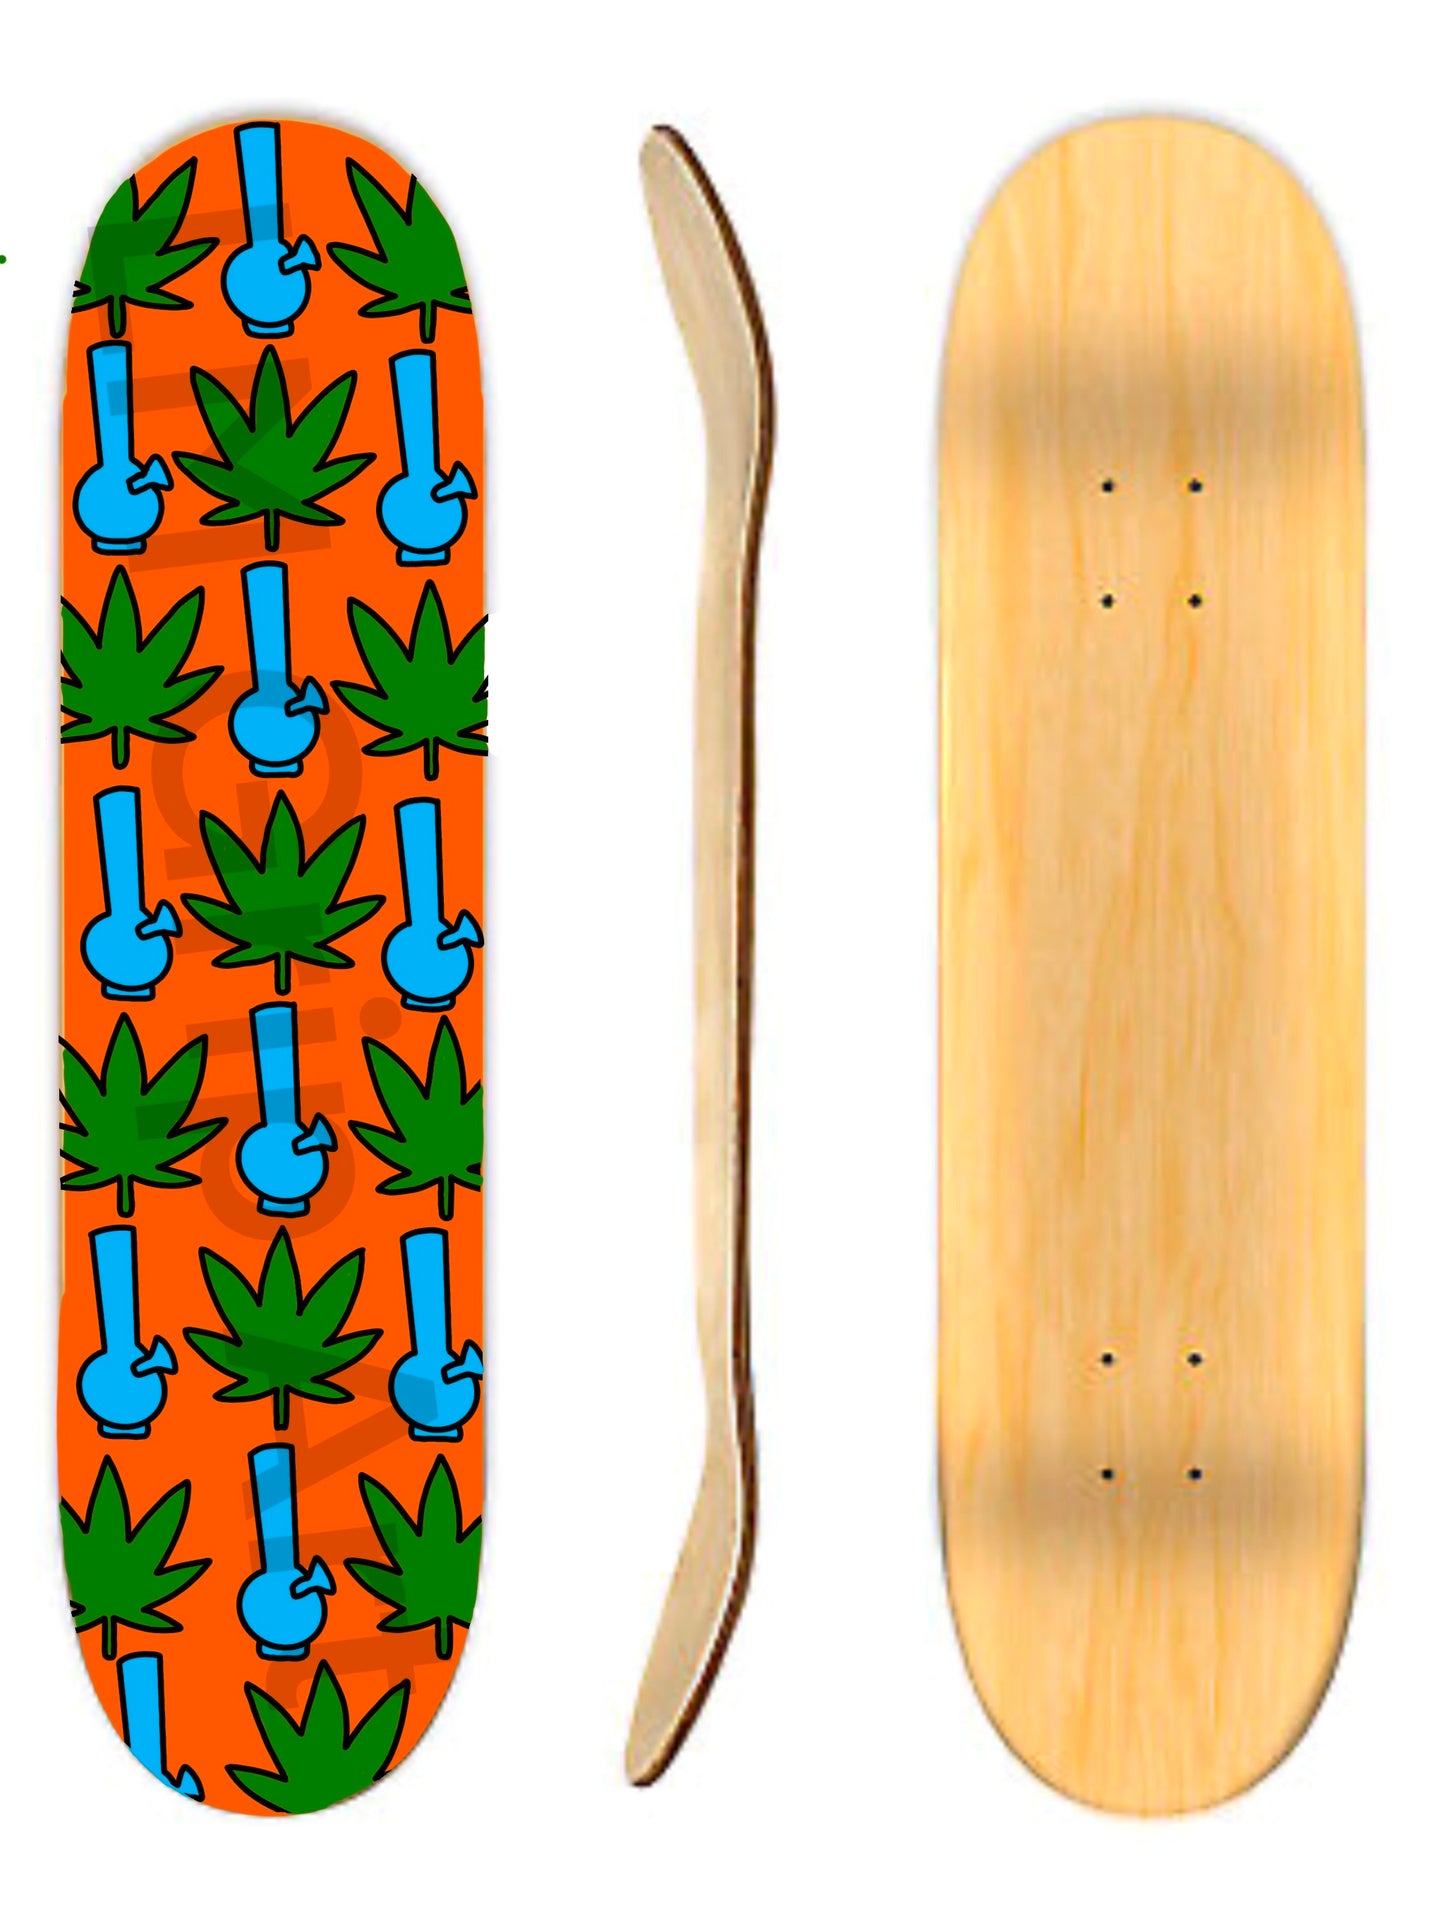 Leaves and Vases Deck